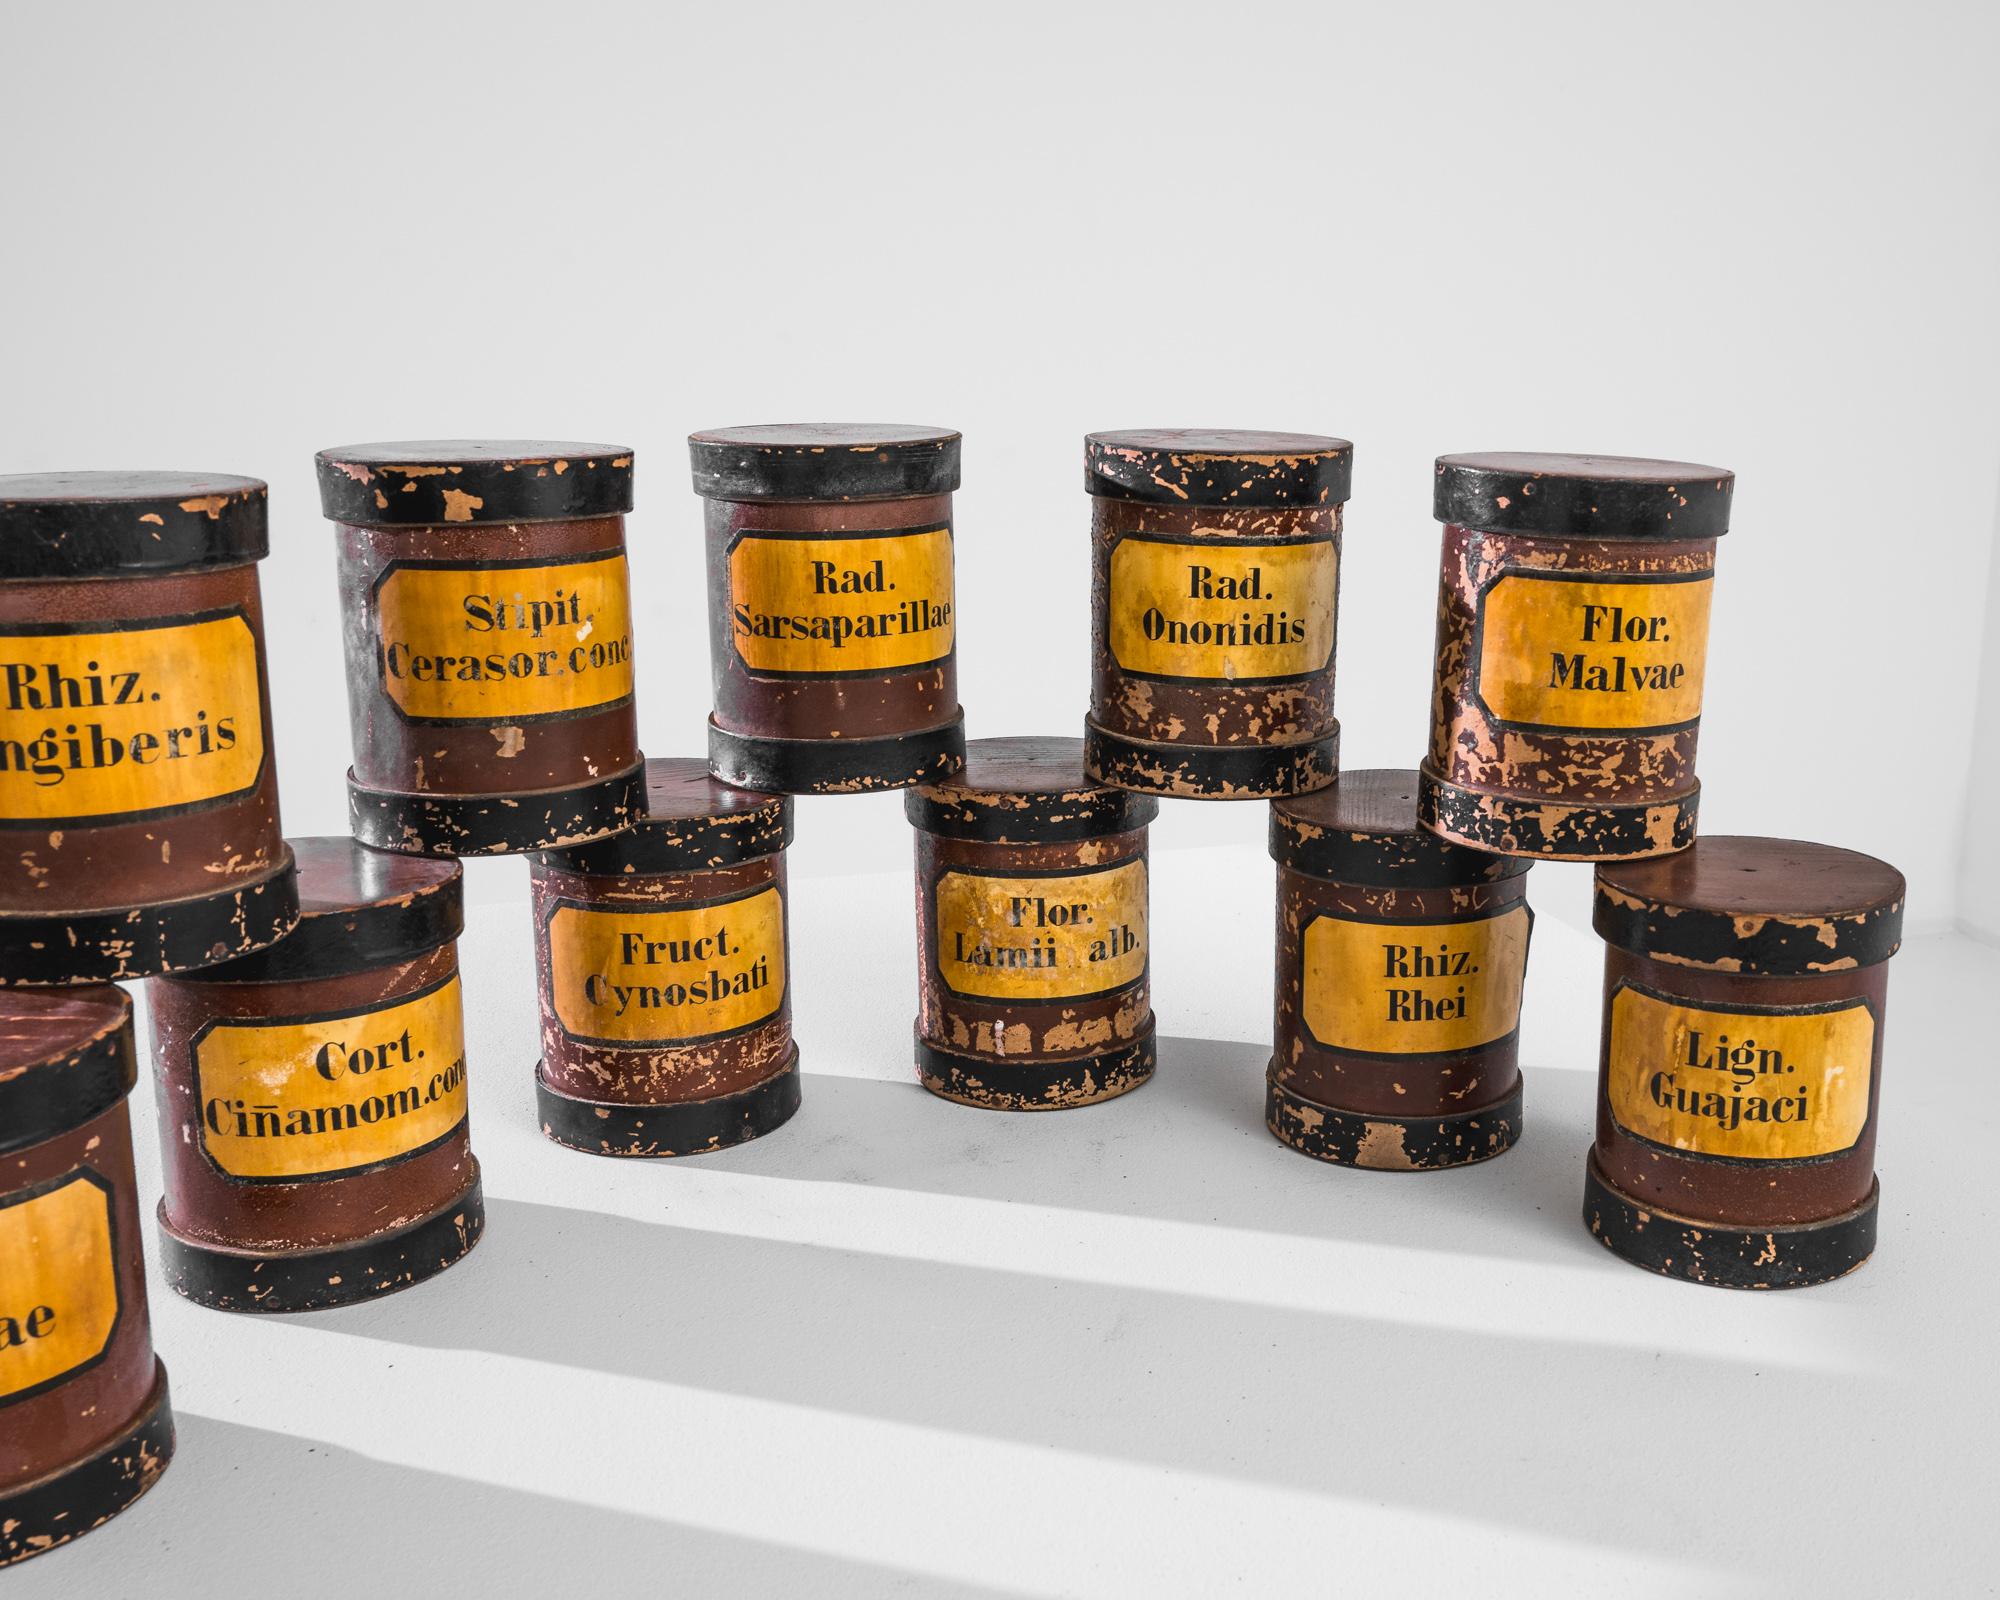 Embark on a journey through time with this set of 1900s French Pharmacy Canisters, a collection of 11 canisters each bearing the names of vintage items used in pharmacies. From Rhiz Zingiberis to Rad Sarsaparillae, each canister represents a bygone